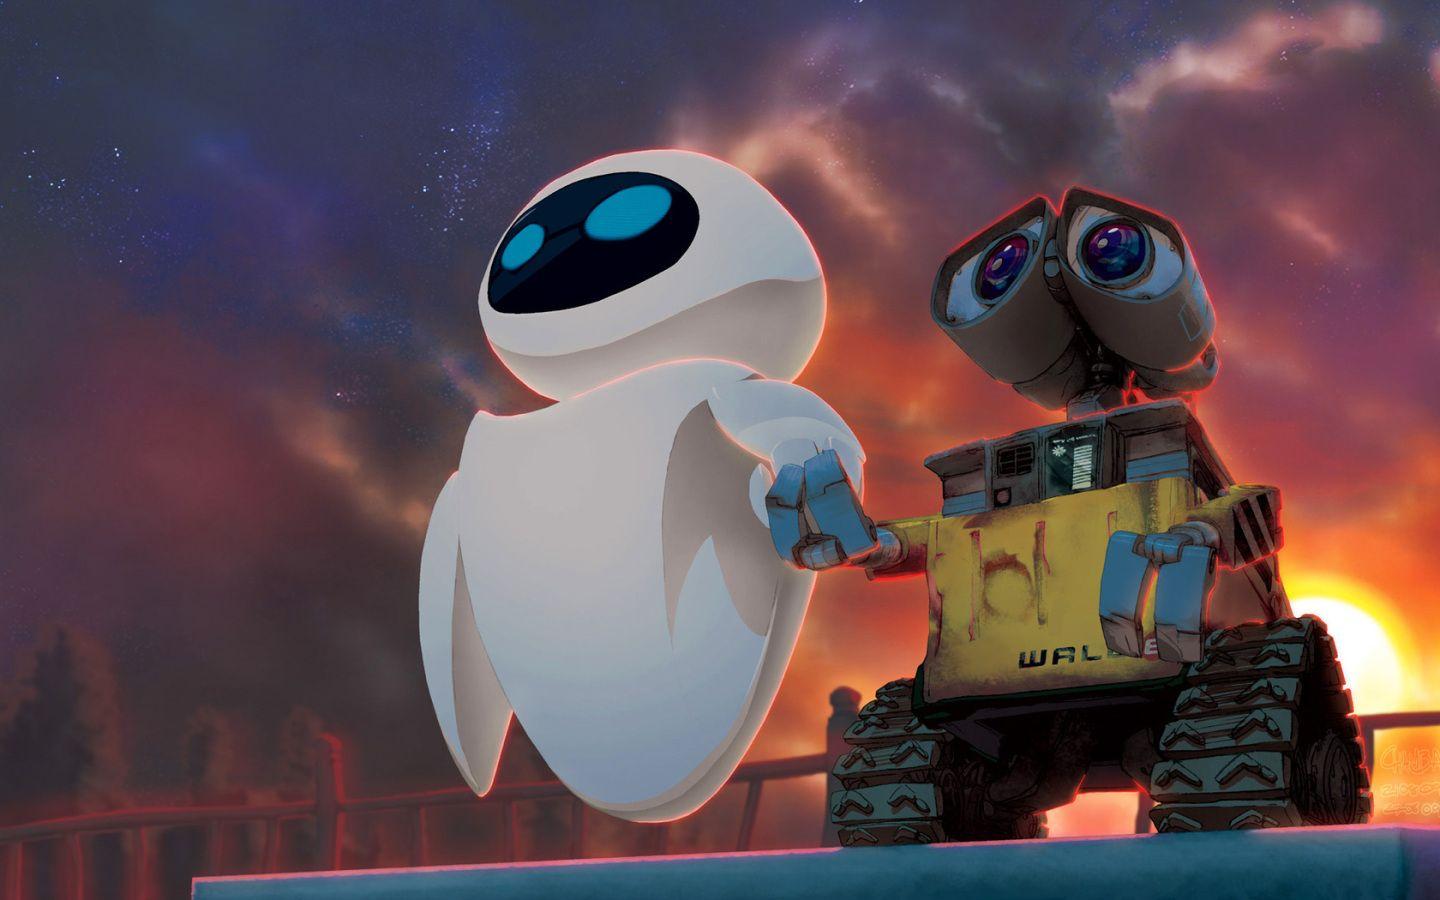 Eve And Wall E Holding Hands Widescreen Wallpaper. Wide